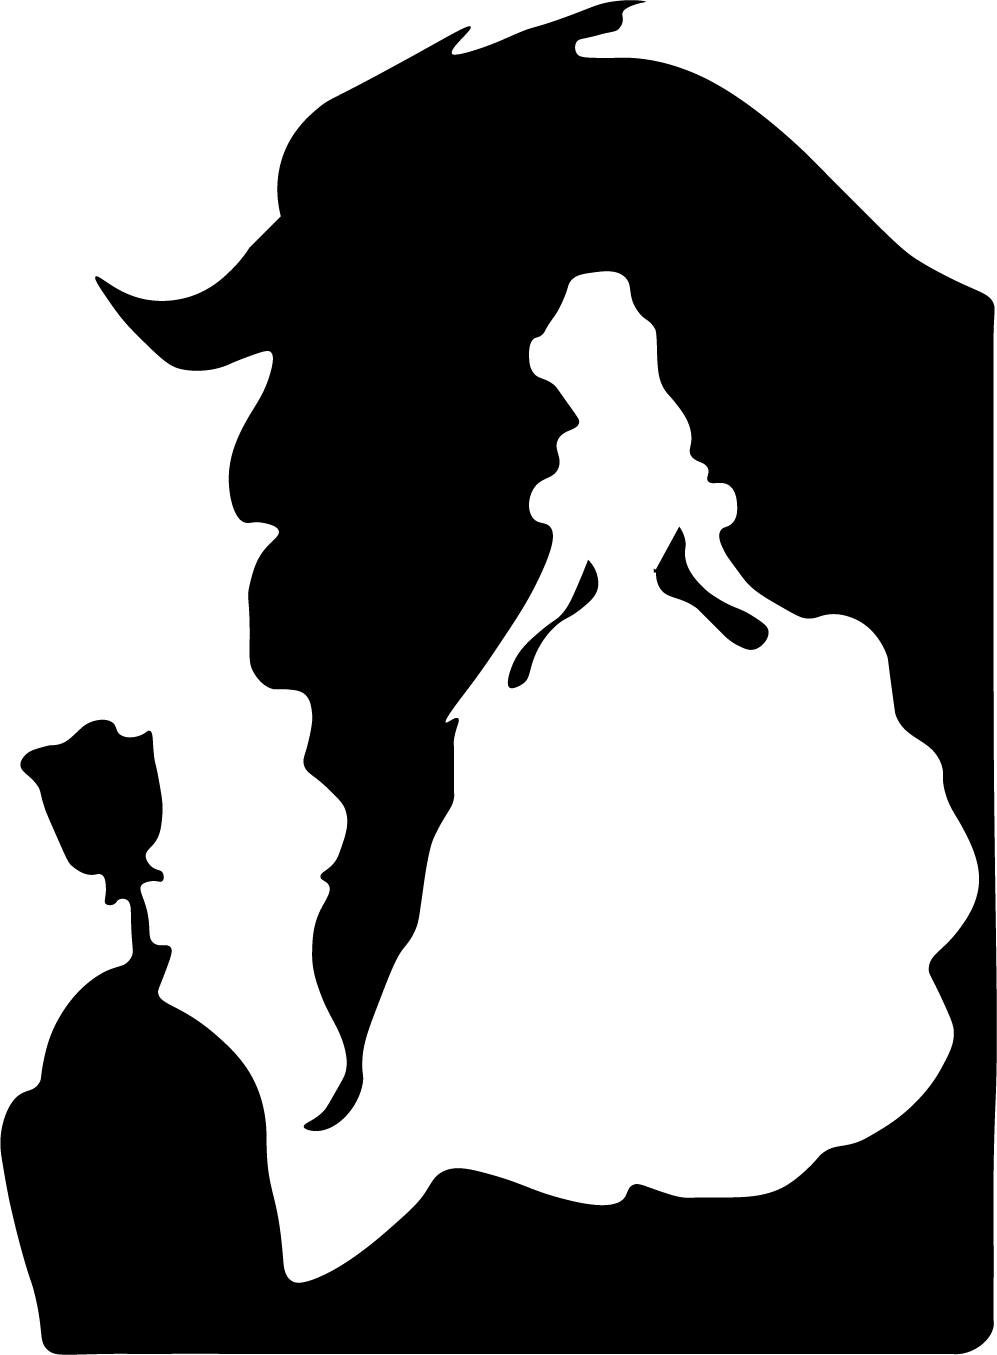 barbie beauty and the beast black doll fairytale sillhoute vectortracing White and Black